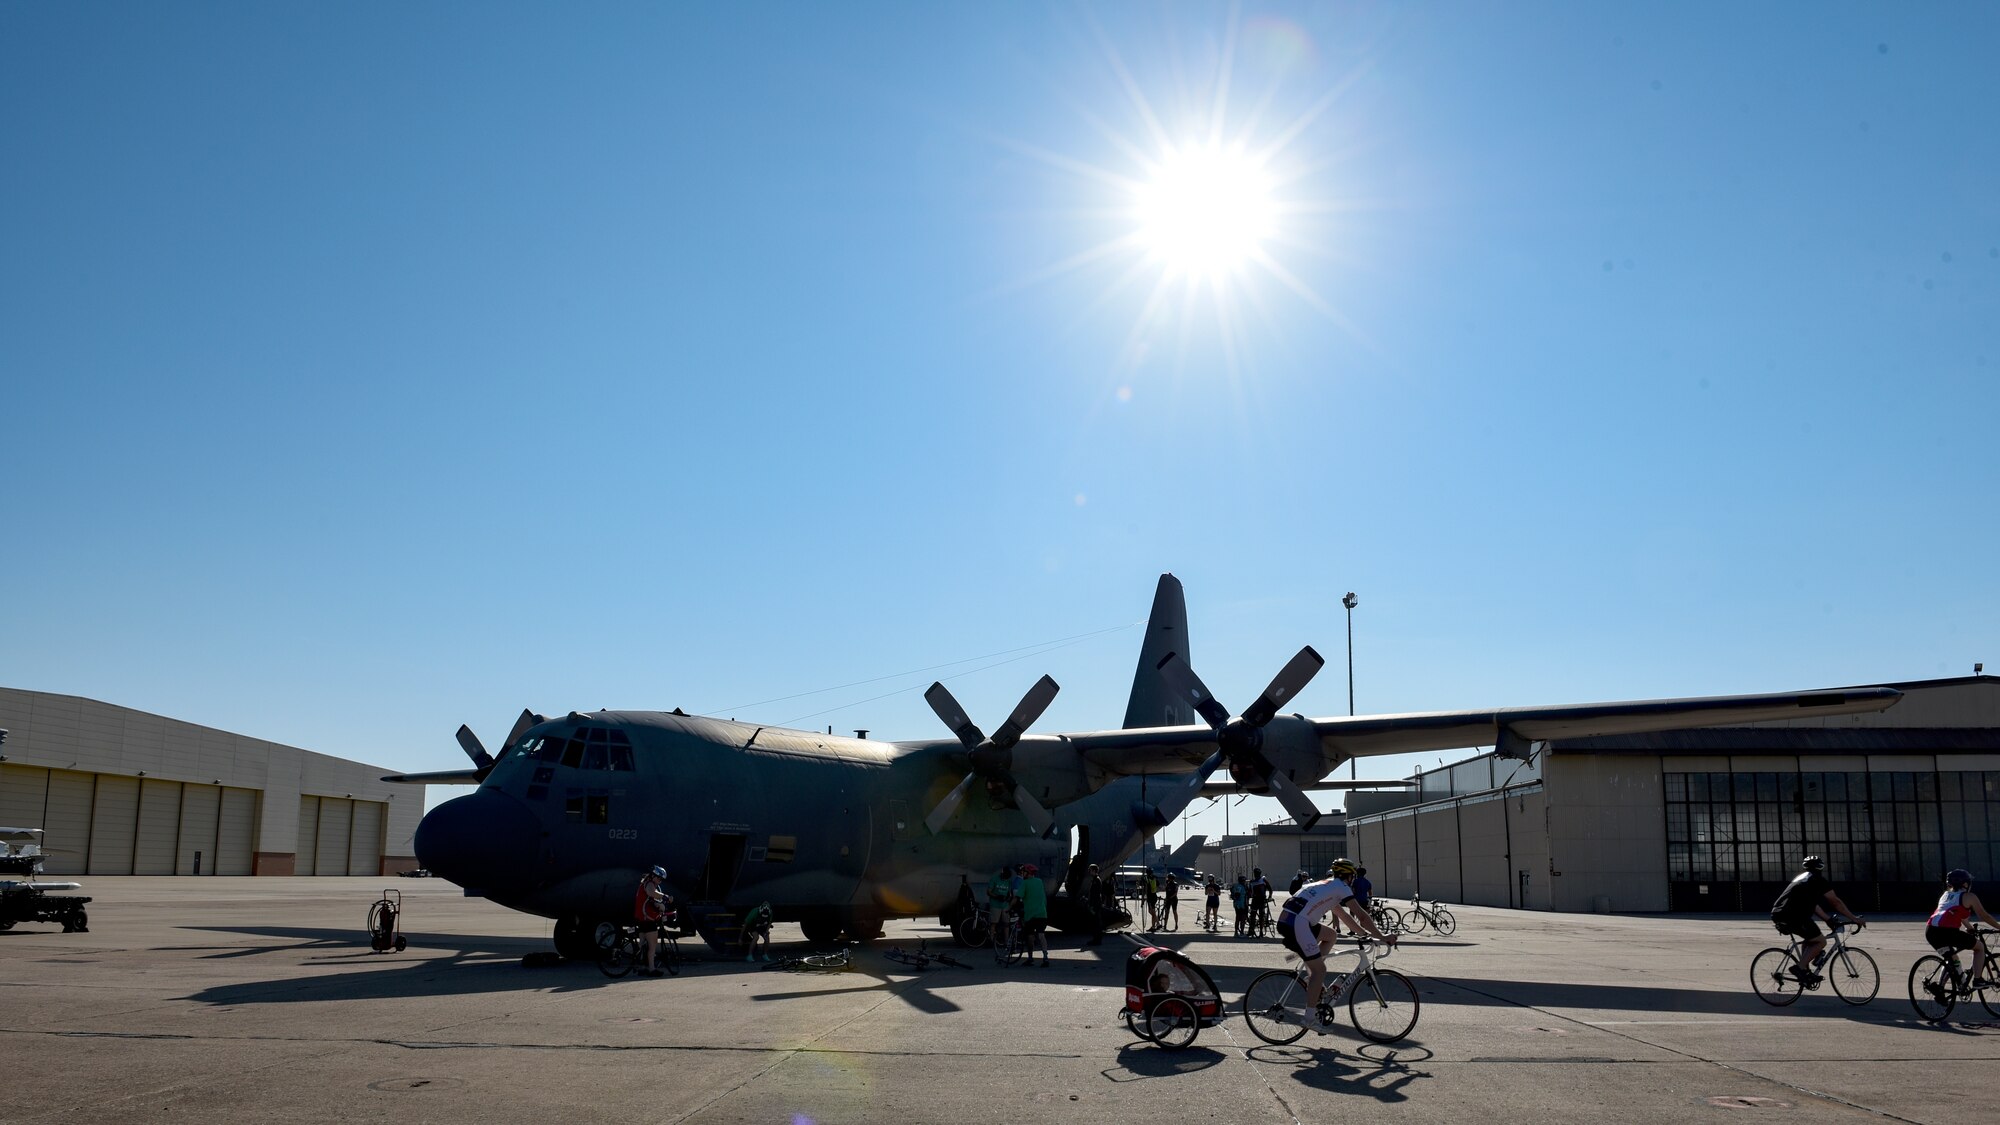 The sun shines over a C-130 as Hotter'N Hell riders pass by and stop to take pictures